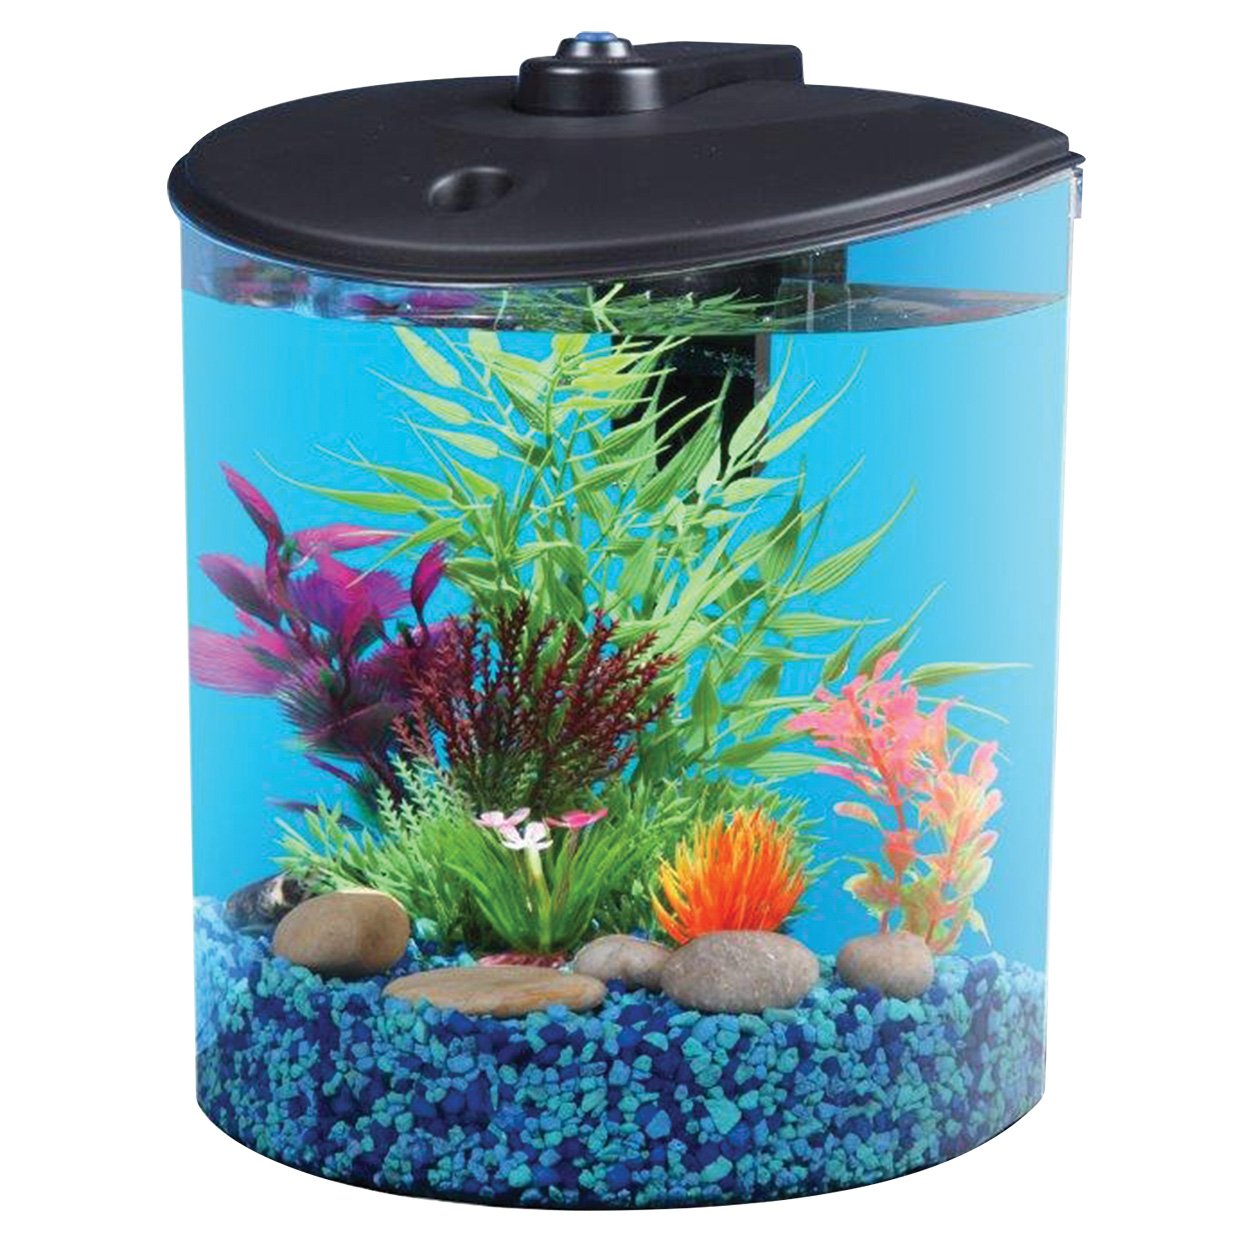 Koller Products AquaView 1.5-gallon Fish Tank with LED Lighting and Power Filter